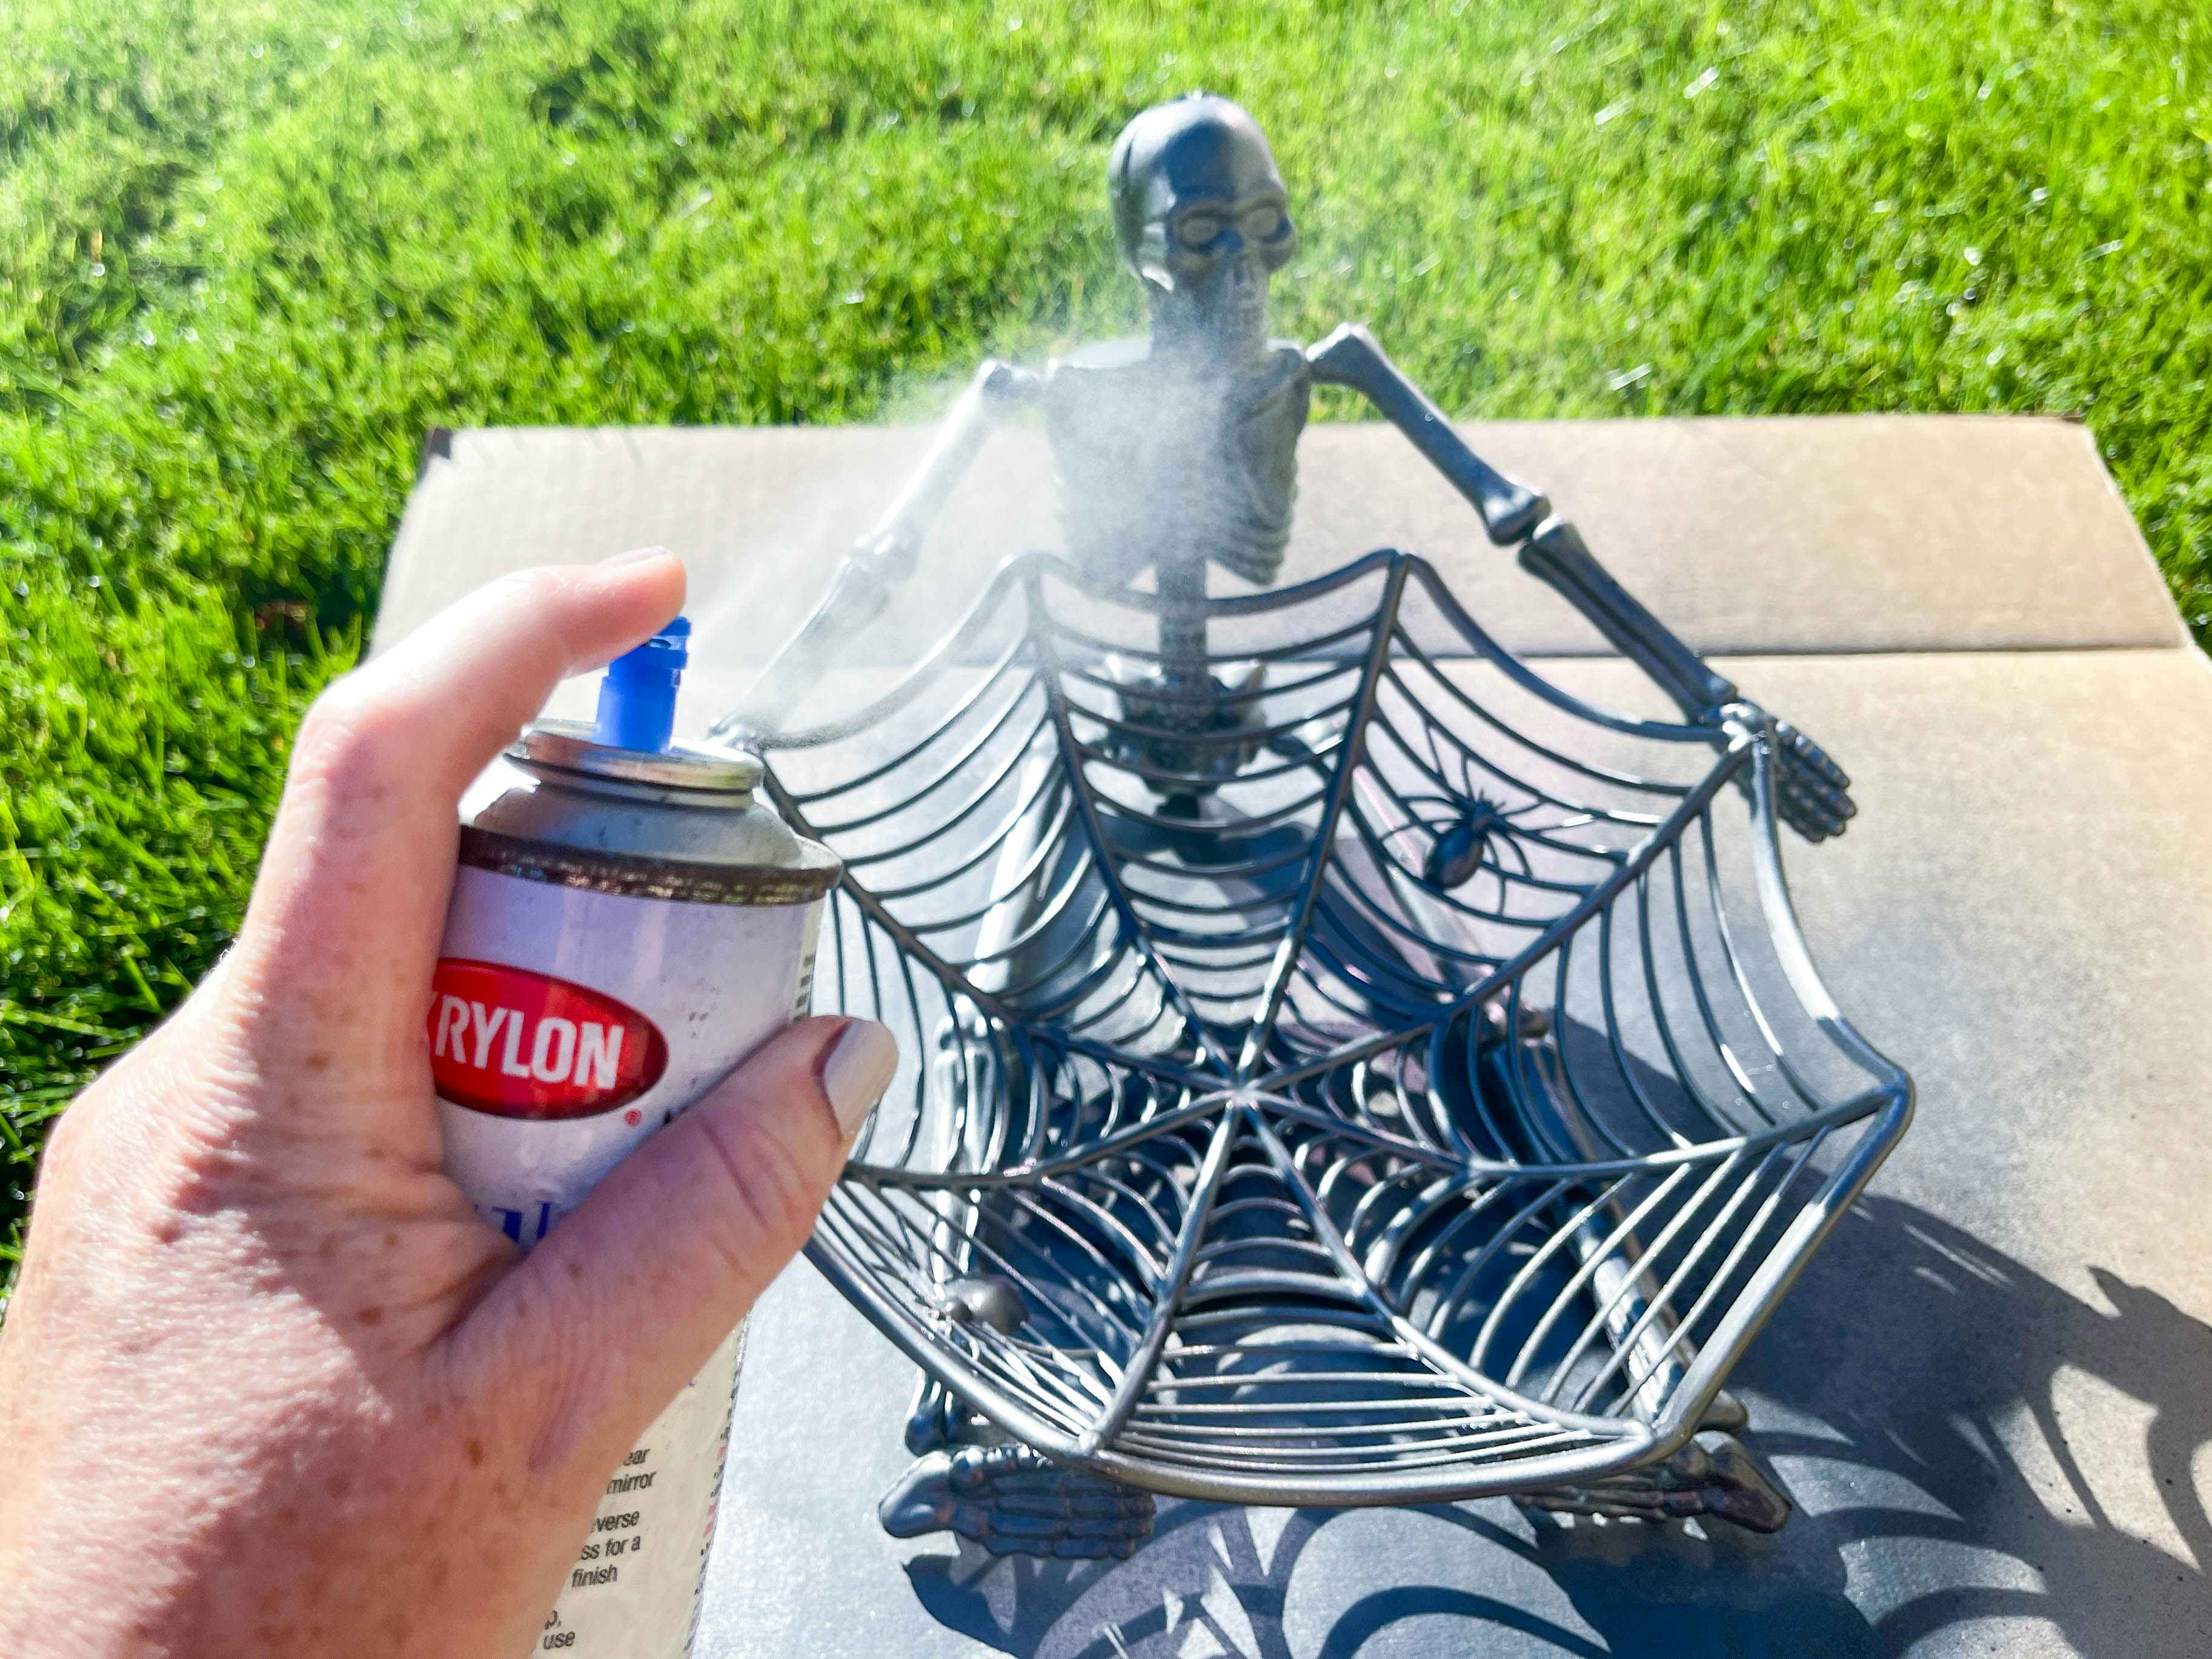 A plastic skeleton glued to a spider web candy bowl being spray painted outside on a piece of cardboard